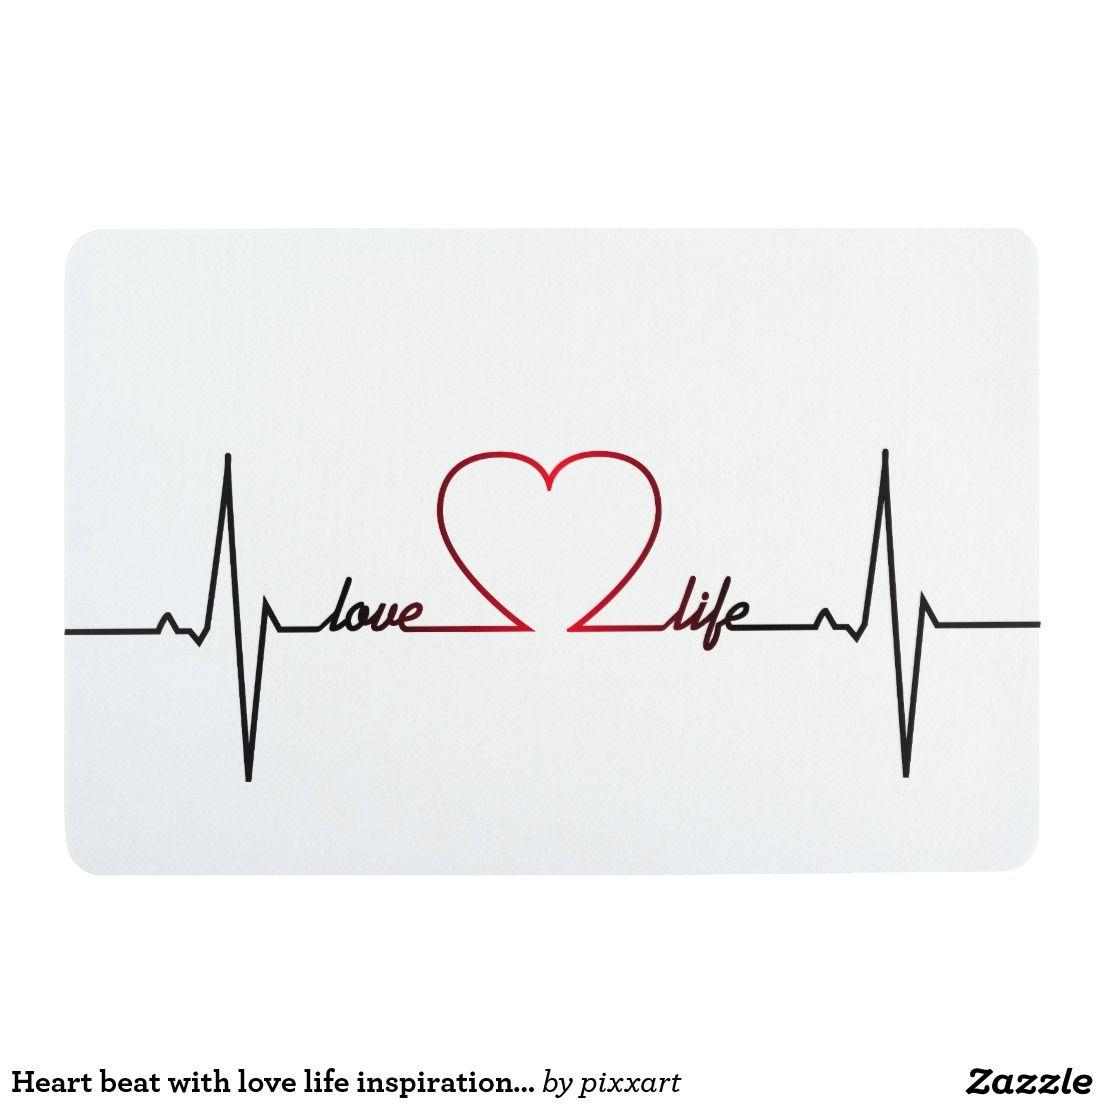 Heart beat with love life inspirational quote floor mat. Zazzle